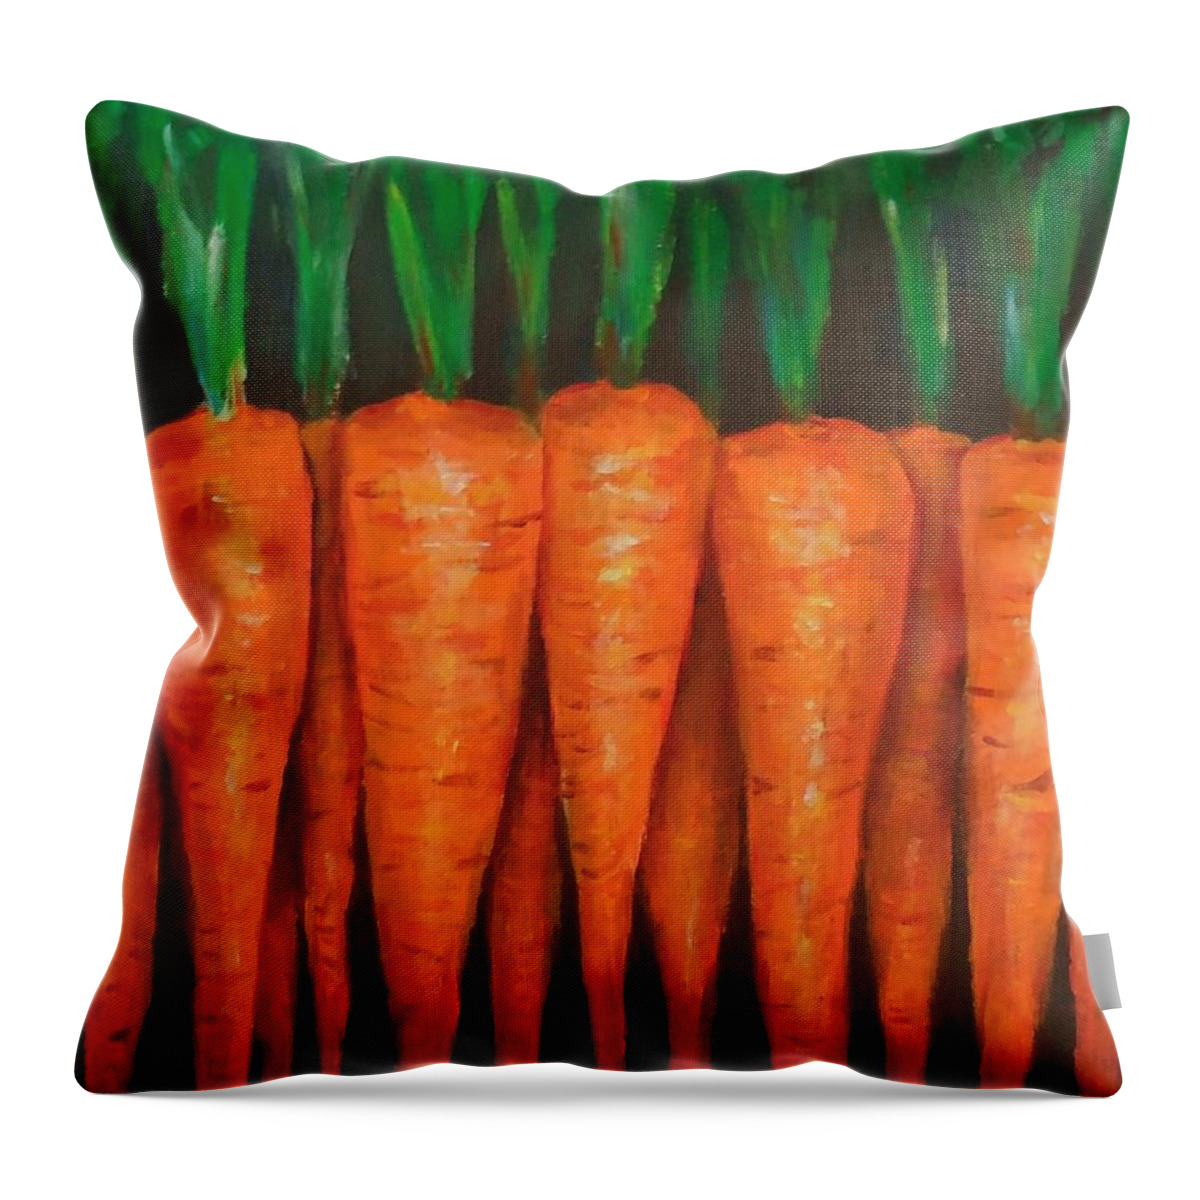 Carrots Throw Pillow featuring the painting Carrots by Cami Lee